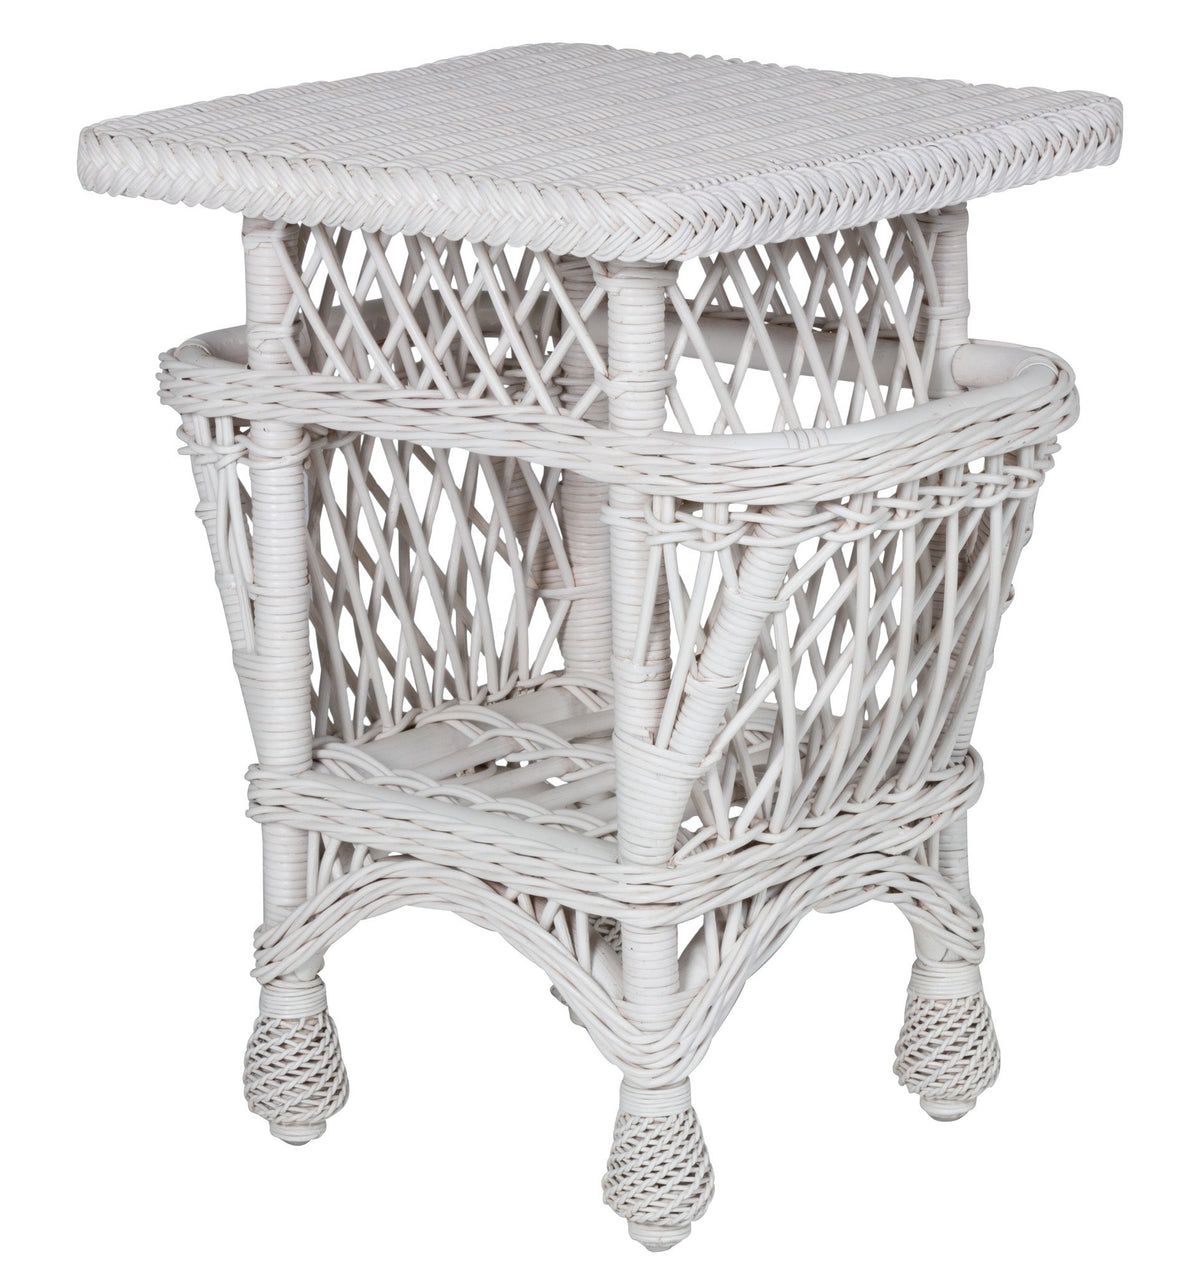 Designer Wicker &amp; Rattan By Tribor Harbor Front Accent Table With Pockets Accessory - Rattan Imports